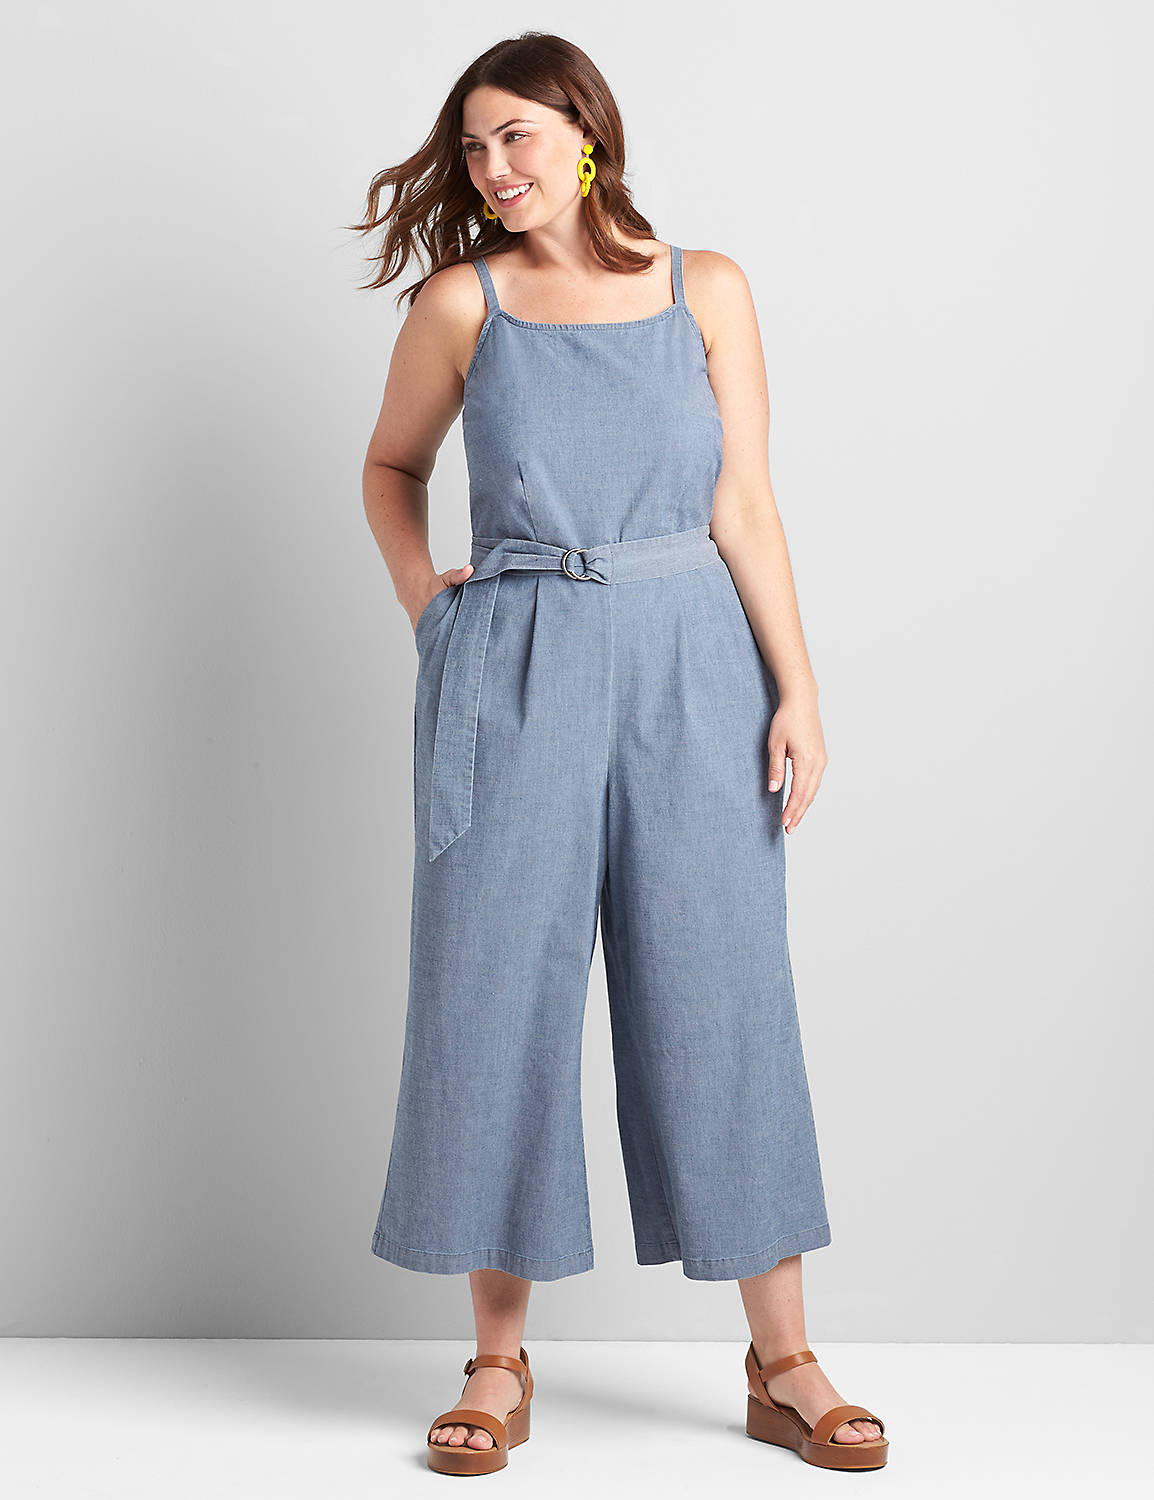 Chambray Cami Cropped Wide-Leg Jumpsuit Product Image 1